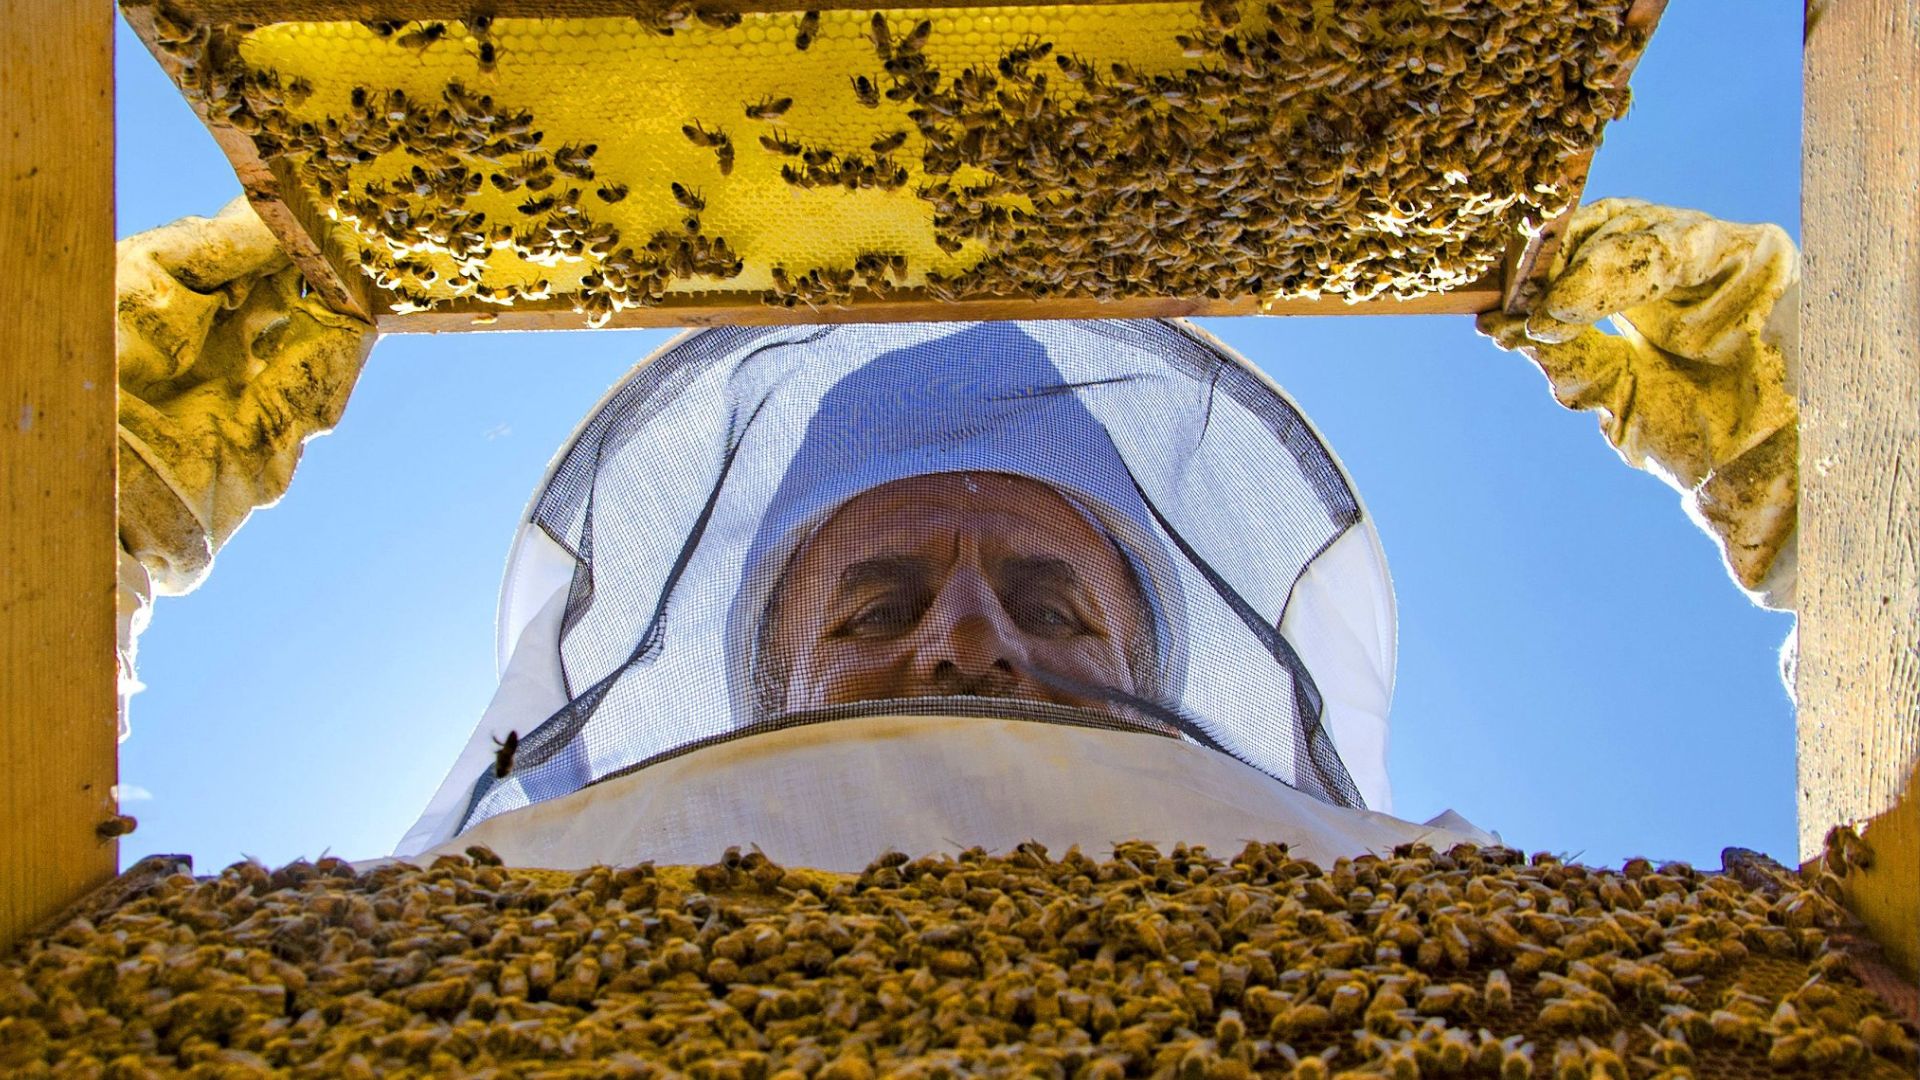 Environmental activists say governments must do more to protect bee populations around the world. /CFP